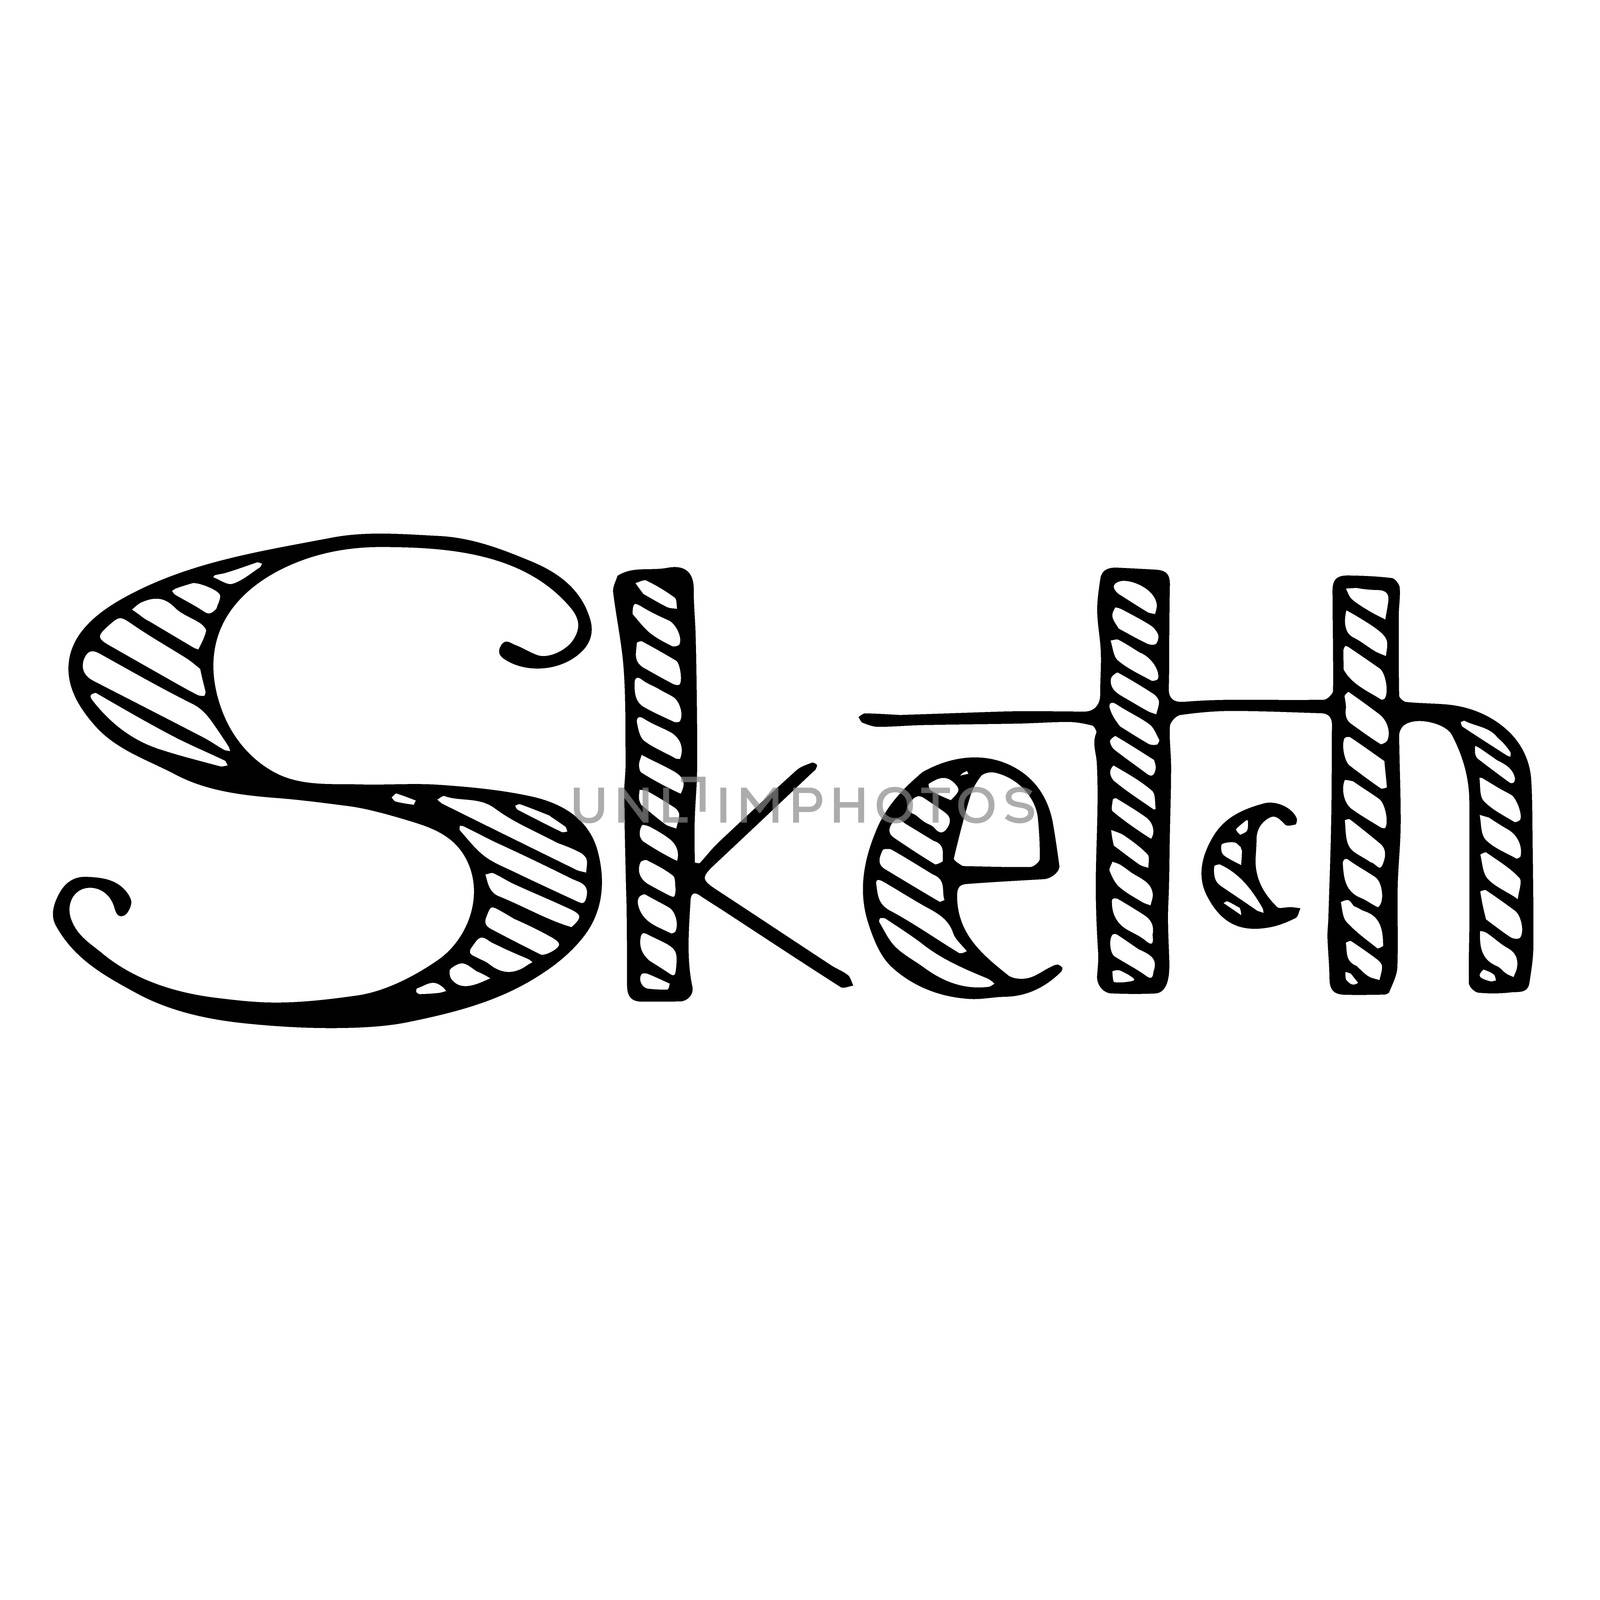 Sketch hand drawn phrase. Ink illustration. Modern brush calligraphy. Isolated on white background. Freehand drawn.